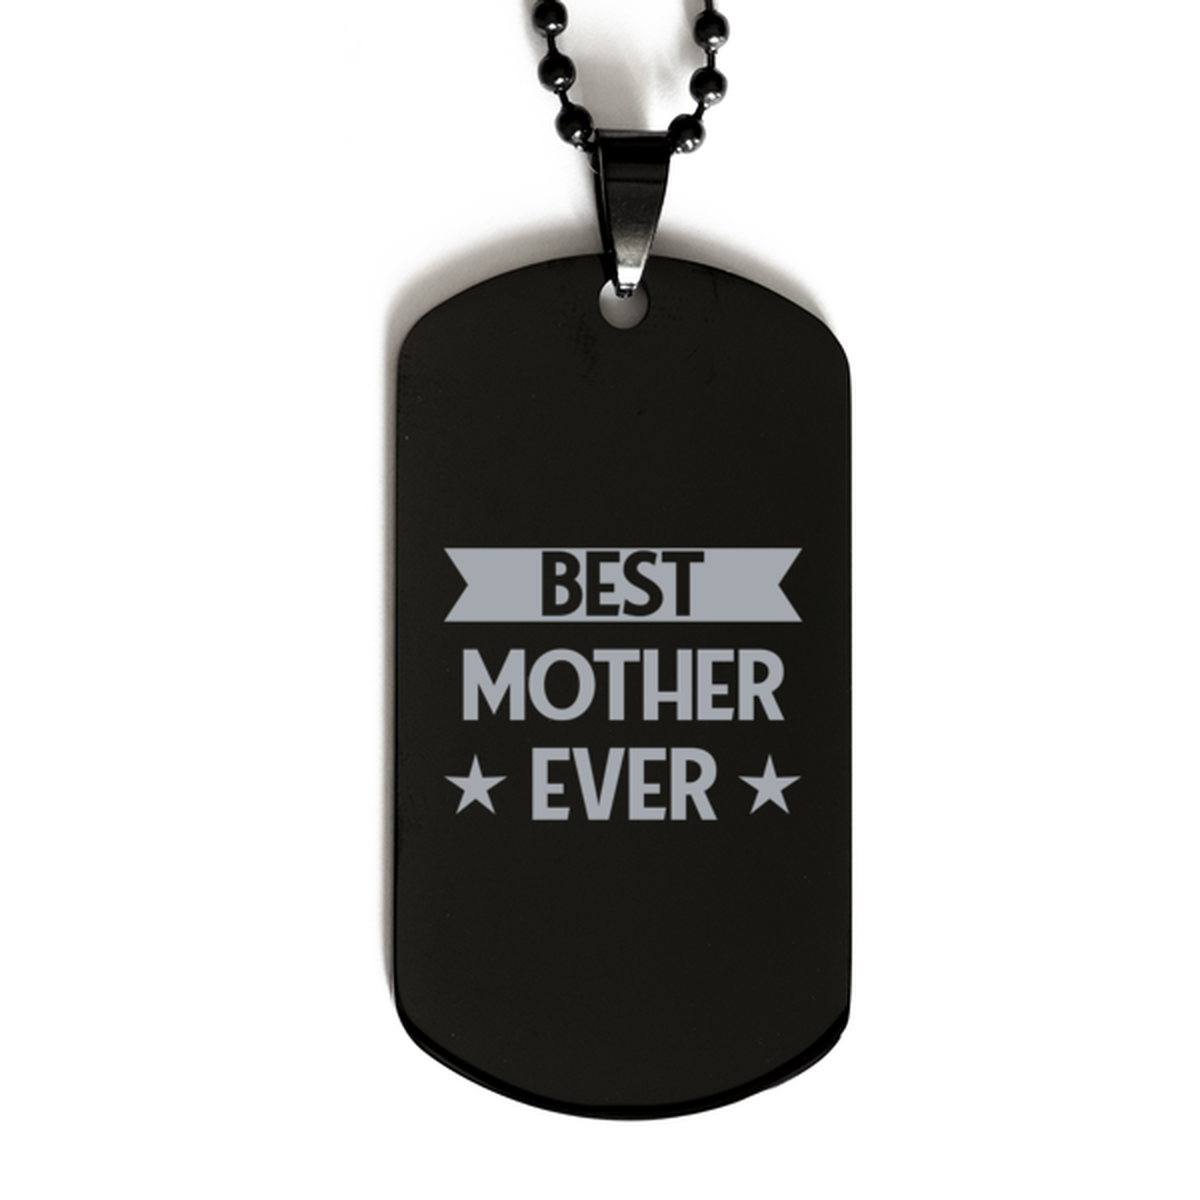 Best Mother Ever Mother Gifts, Funny Black Dog Tag For Mother, Birthday Family Presents Engraved Necklace For Women